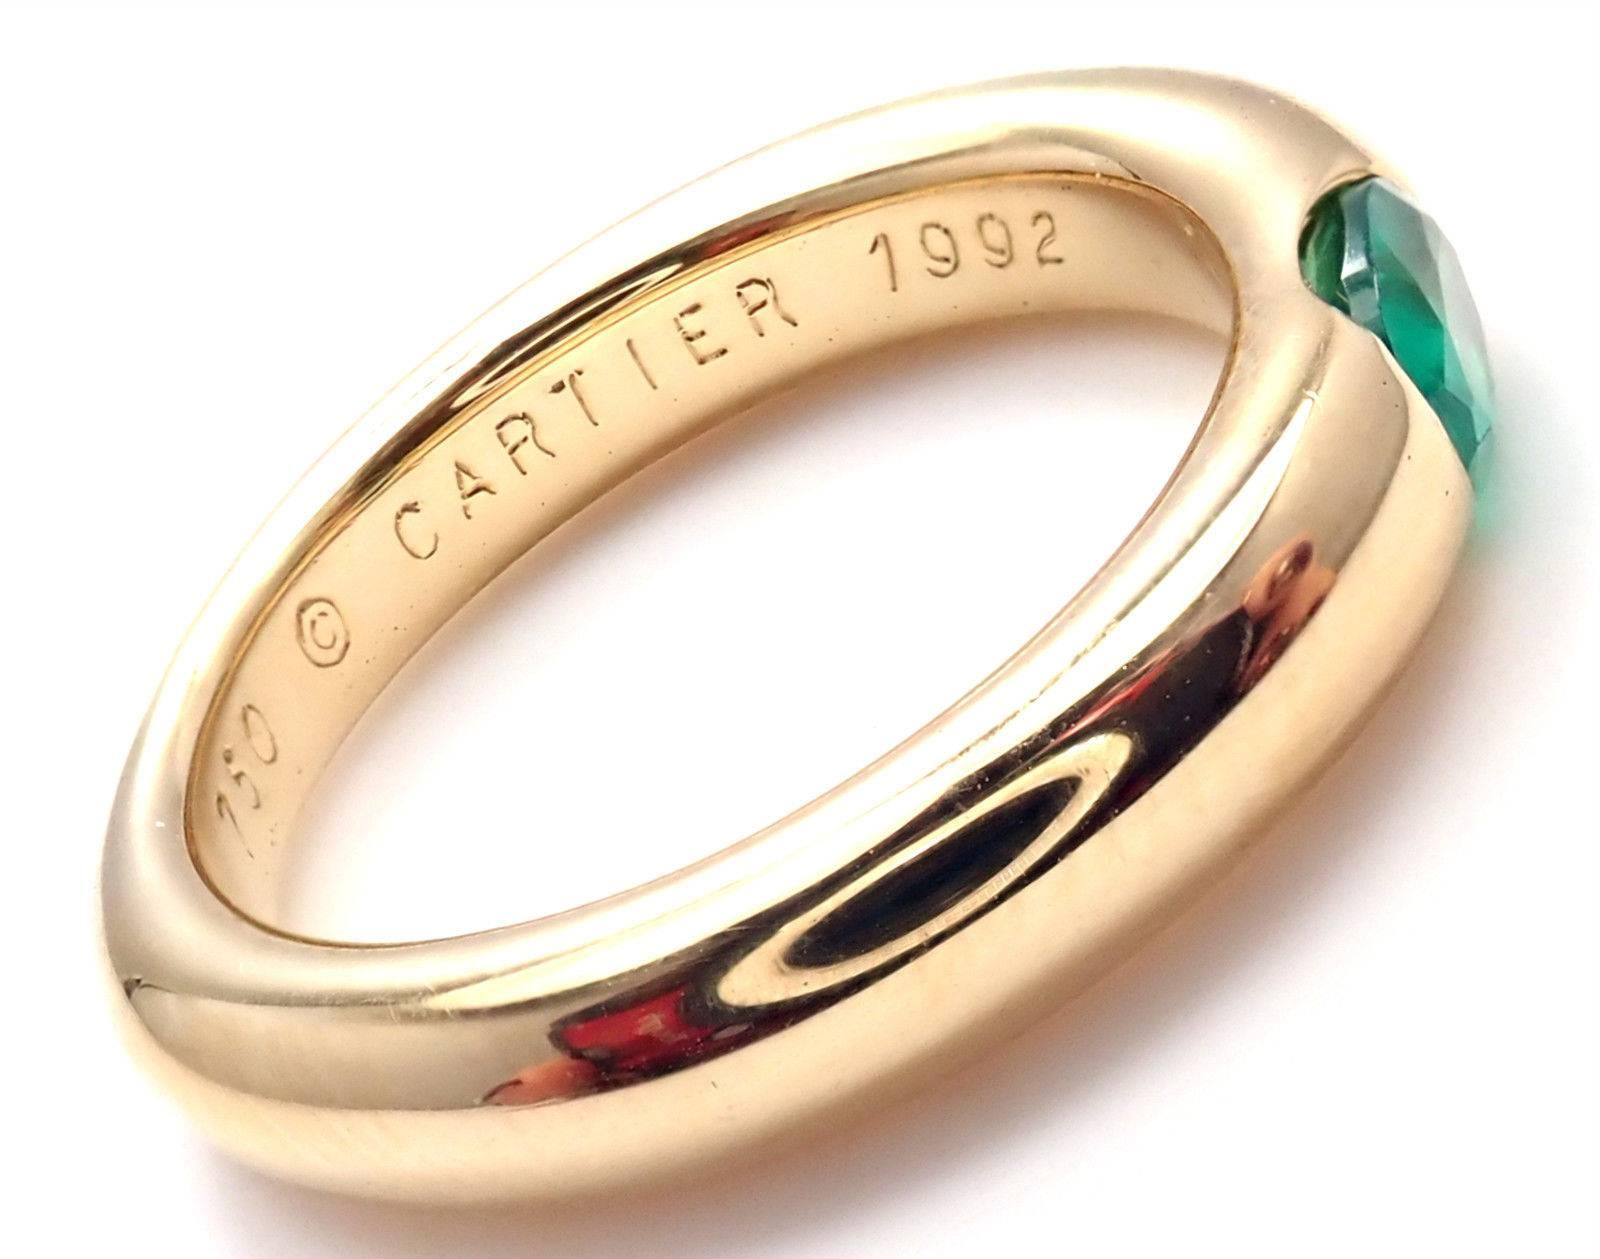 18k Yellow Gold Ellipse Emerald Band Ring by Cartier.
With 1 oval-shaped beautiful emerald 5mm x 4mm.
This ring comes with Cartier box.
Details:
Width: 4mm
Weight: 8.5 grams
Ring Size: European 53, US 6 1/4
Stamped Hallmarks: Cartier 750 53 C90640